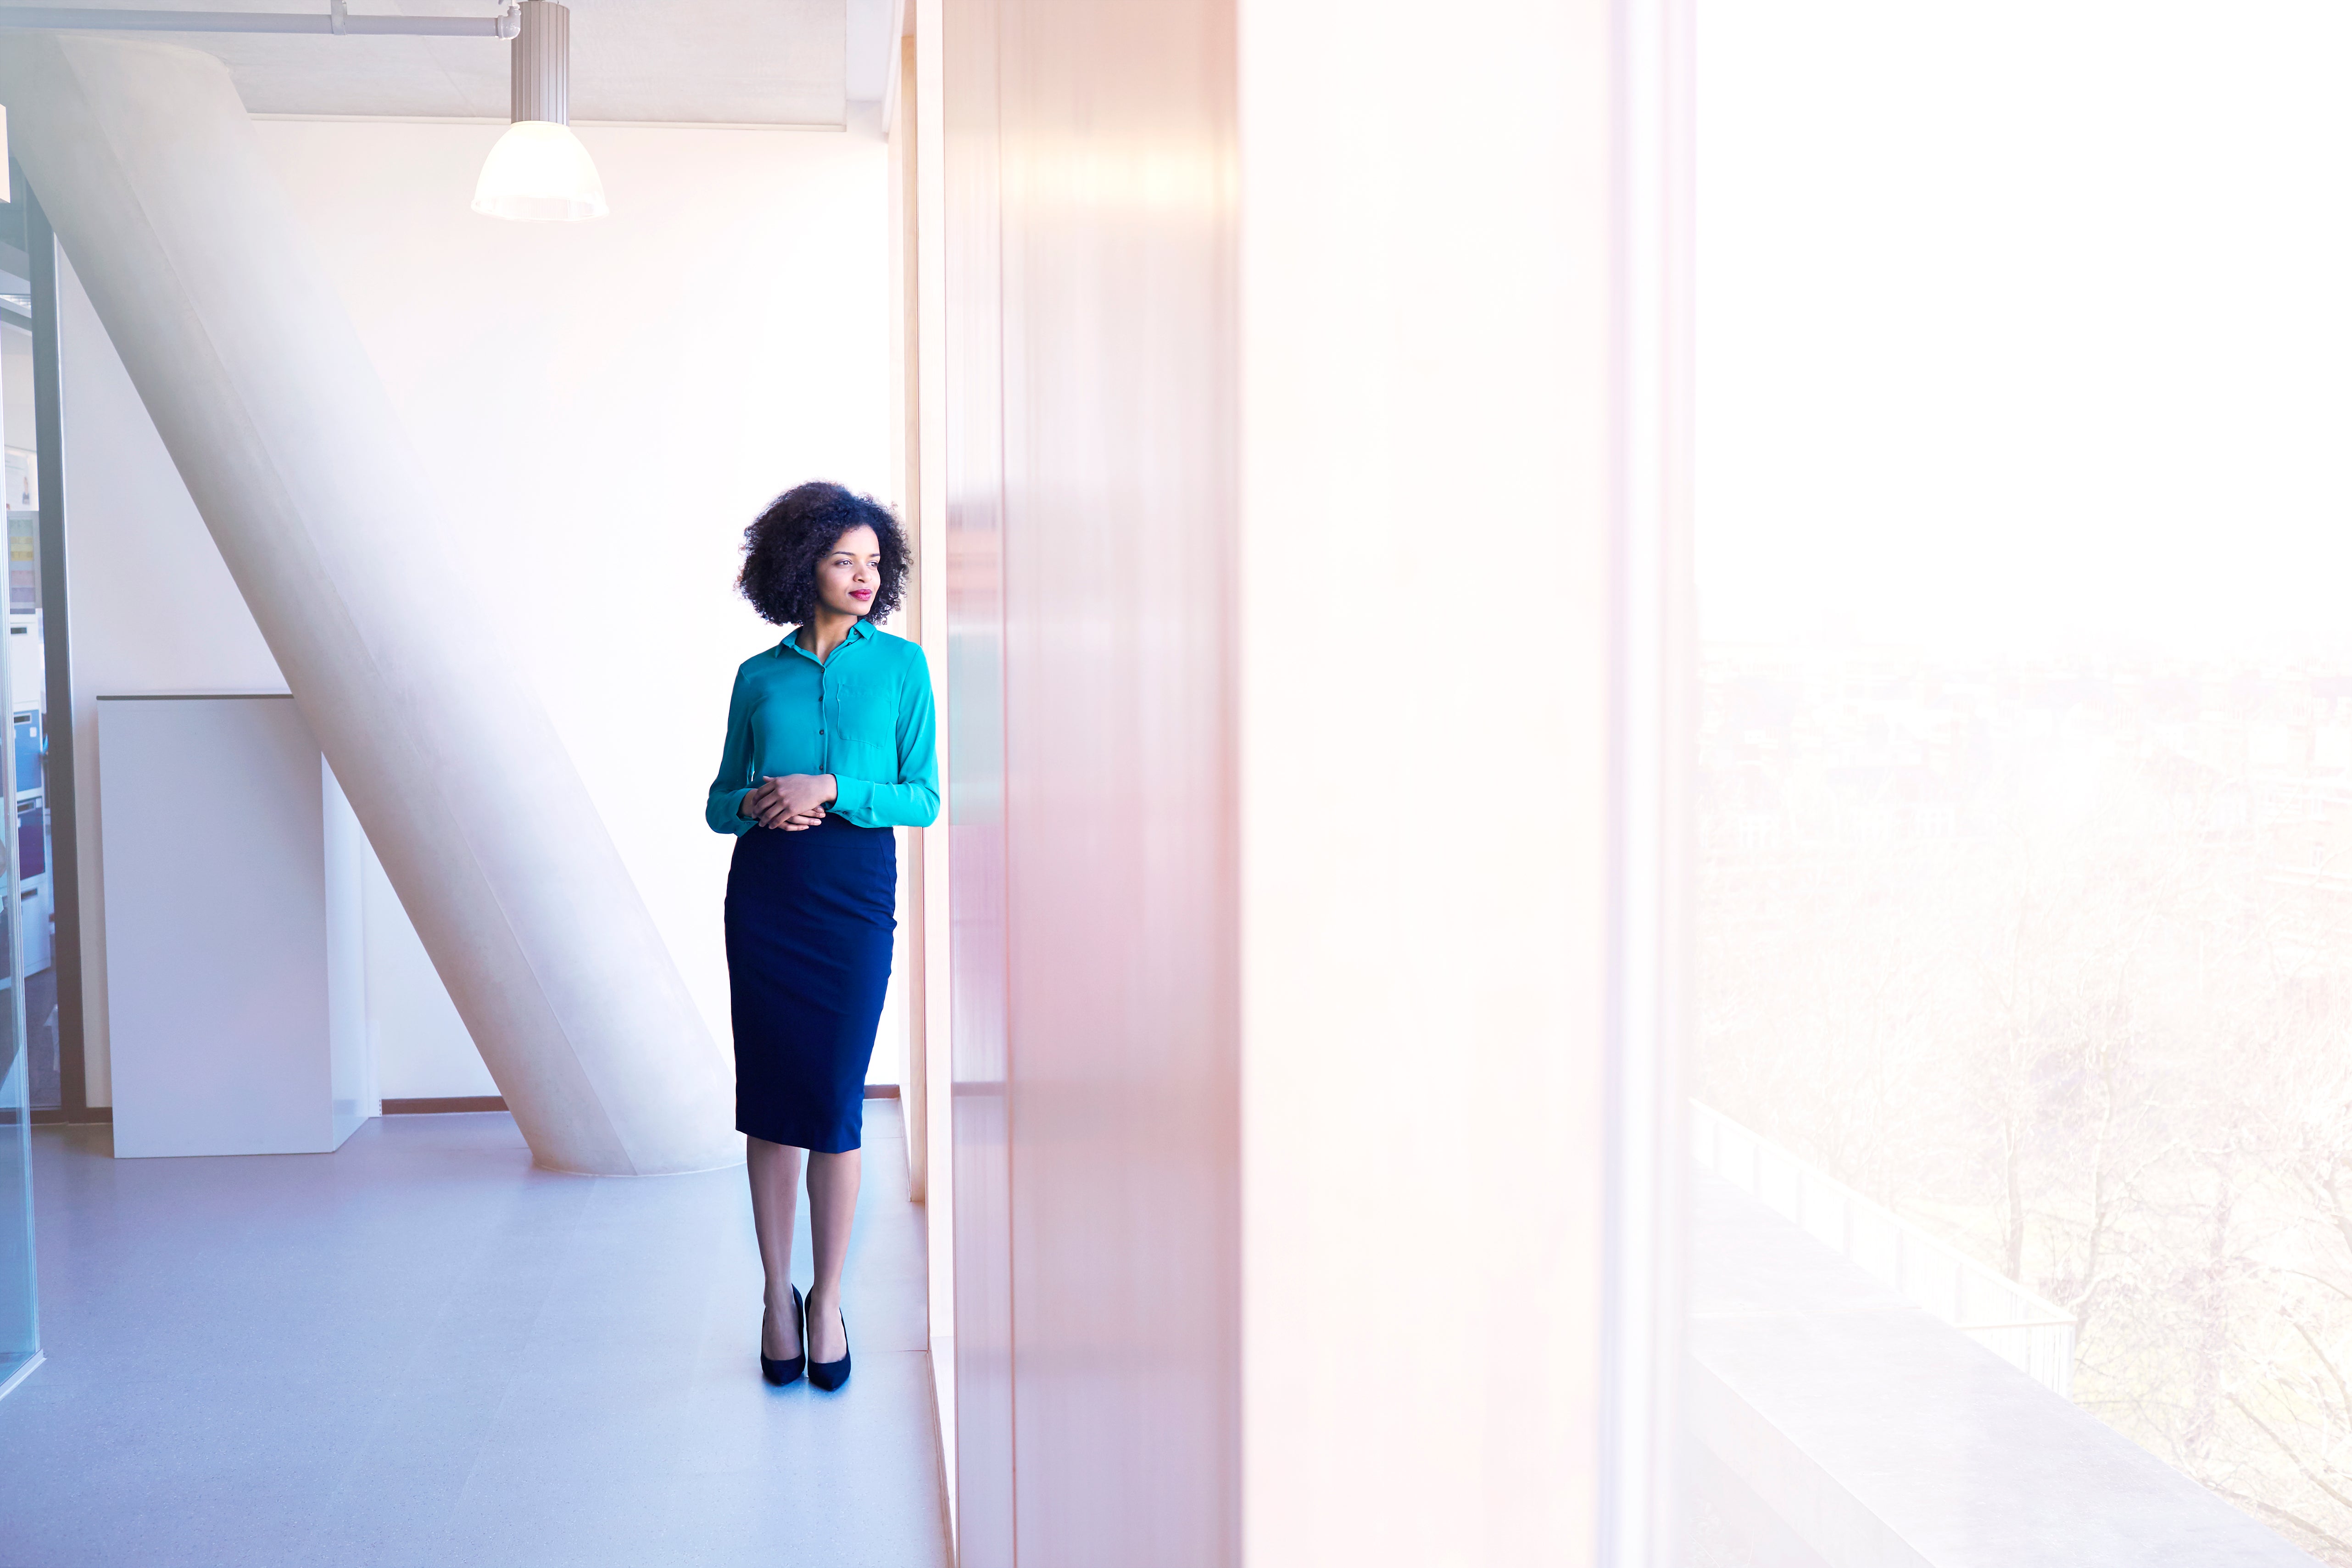 No Black Woman Leads A Fortune 500 Company As White Men Account For 72% Of Corporate Leadership